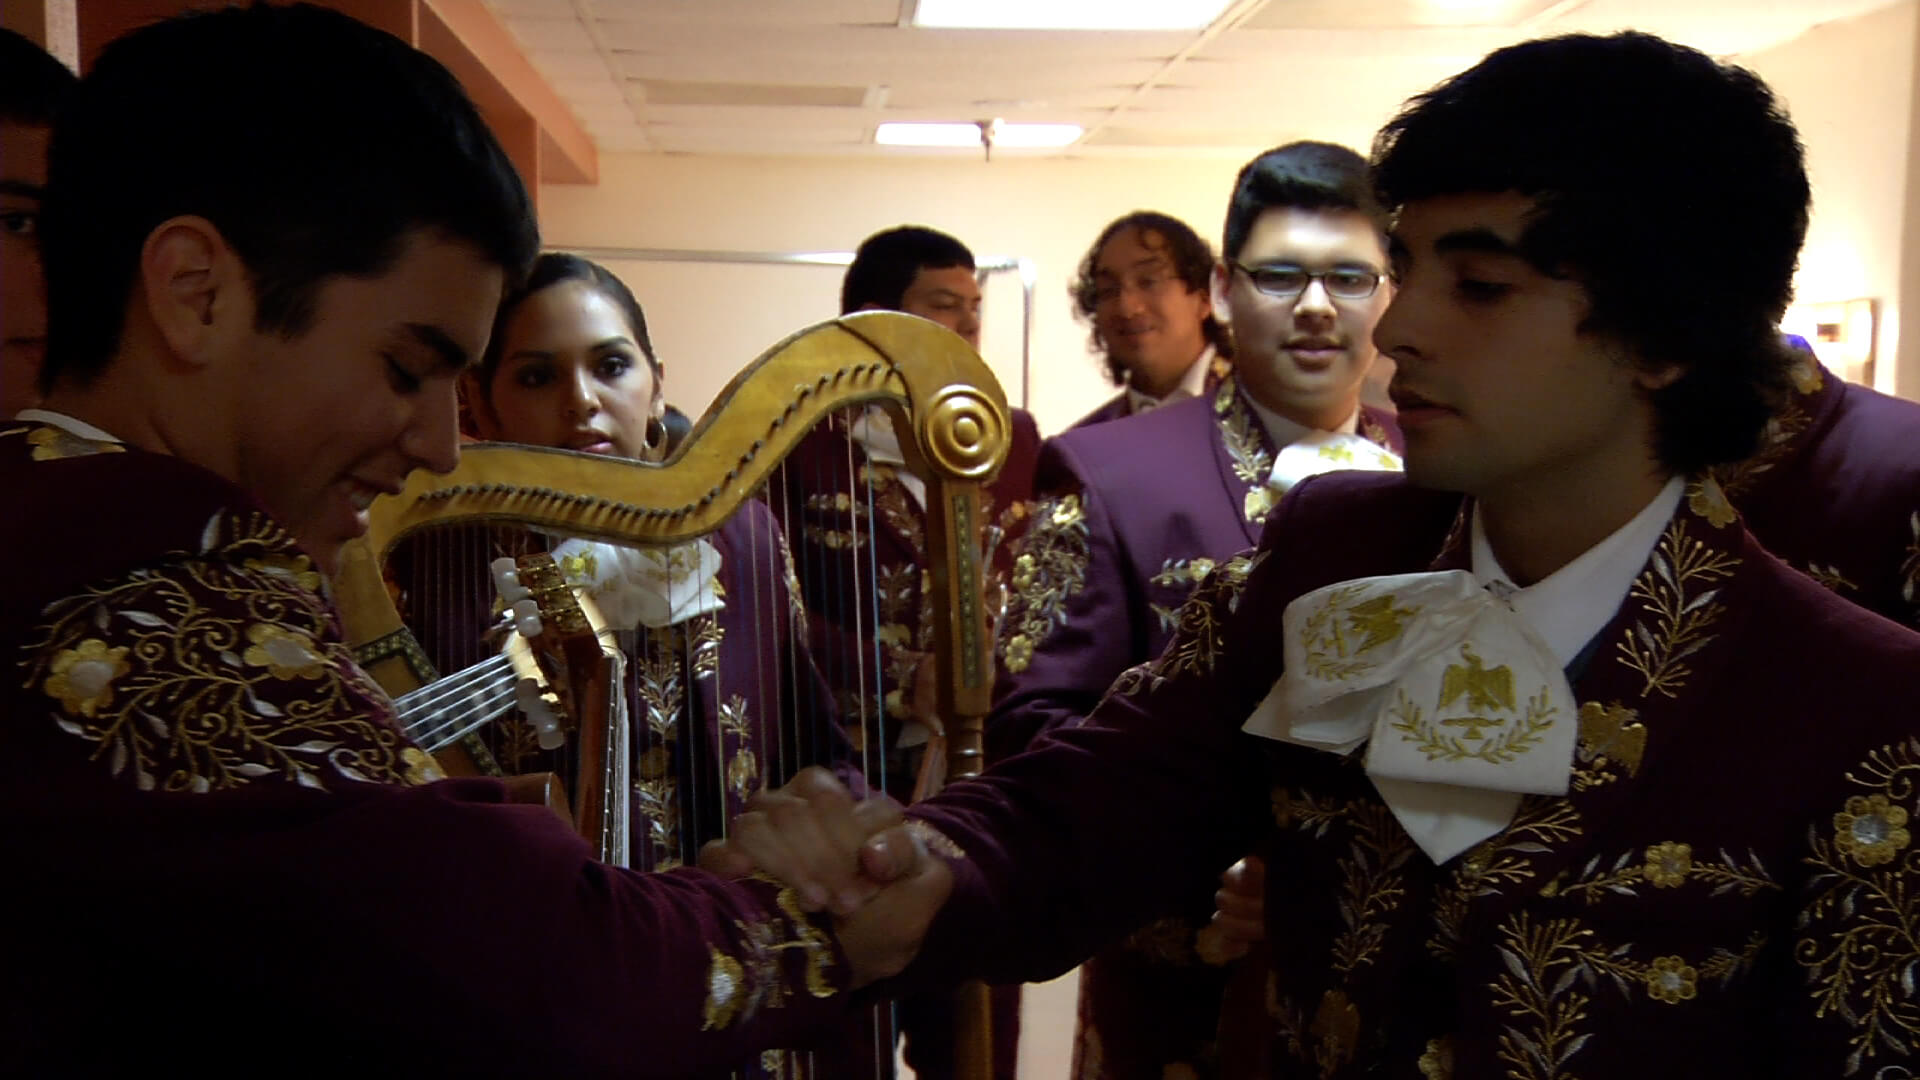 Still from Mariachi High. Two young men in the foreground shake hands in front of a young woman holding a harp among other band members in mariachi suits. They are gathered backstage.